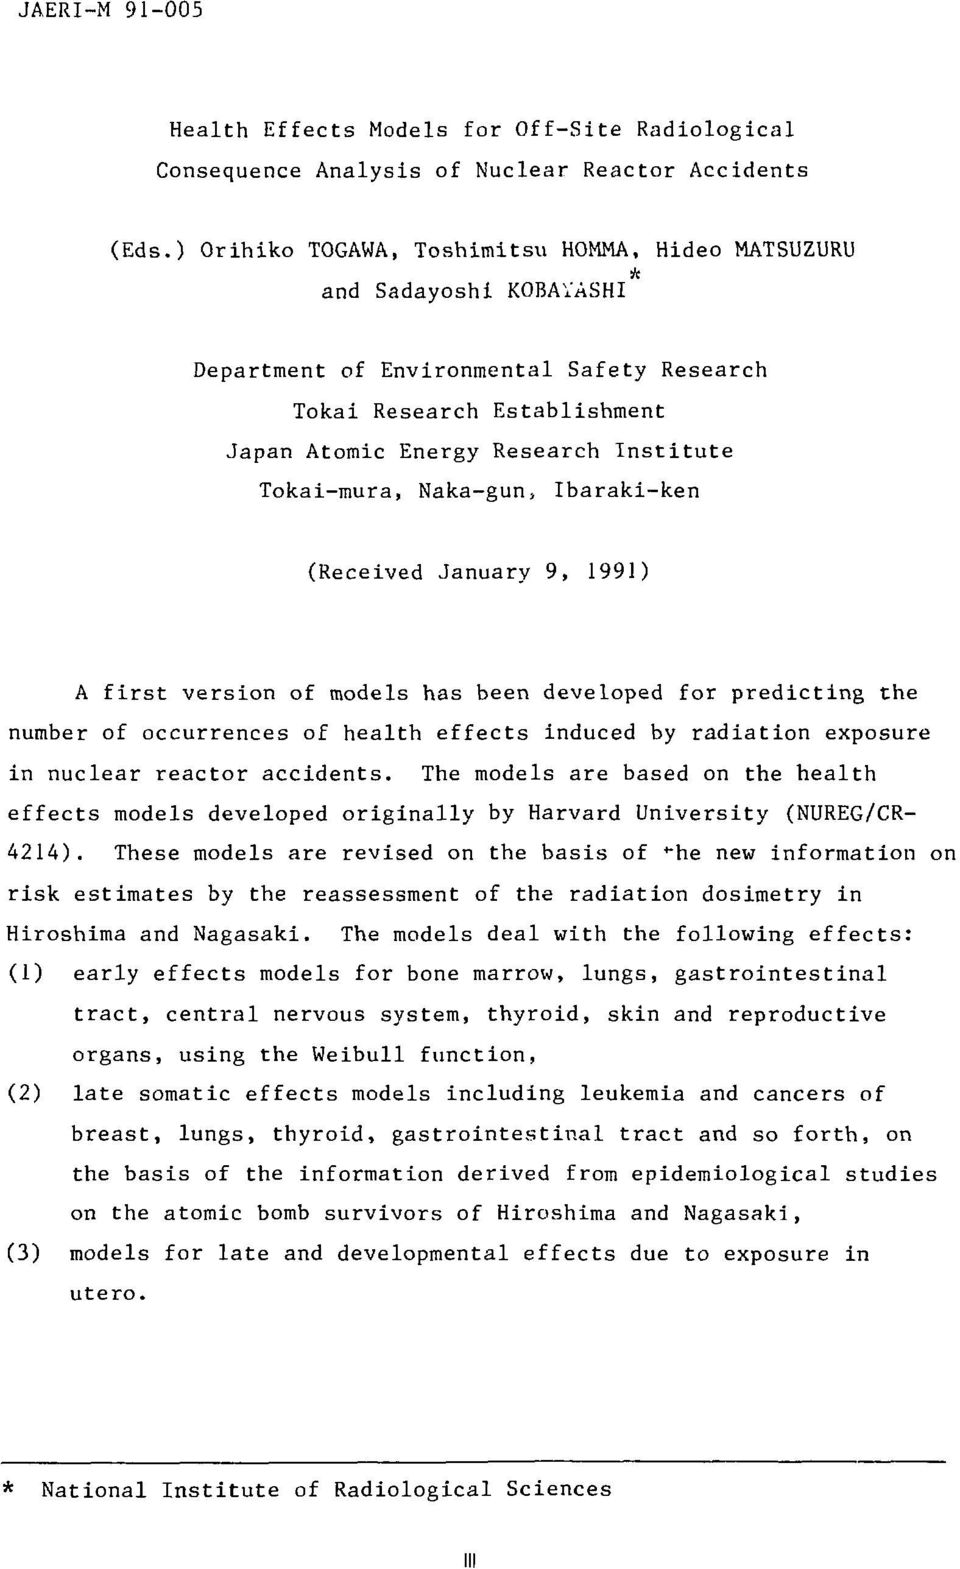 Naka-gun, Ibaraki-ken (Received January 9, 1991) A first version of models has been developed for predicting the number of occurrences of health effects induced by radiation exposure in nuclear